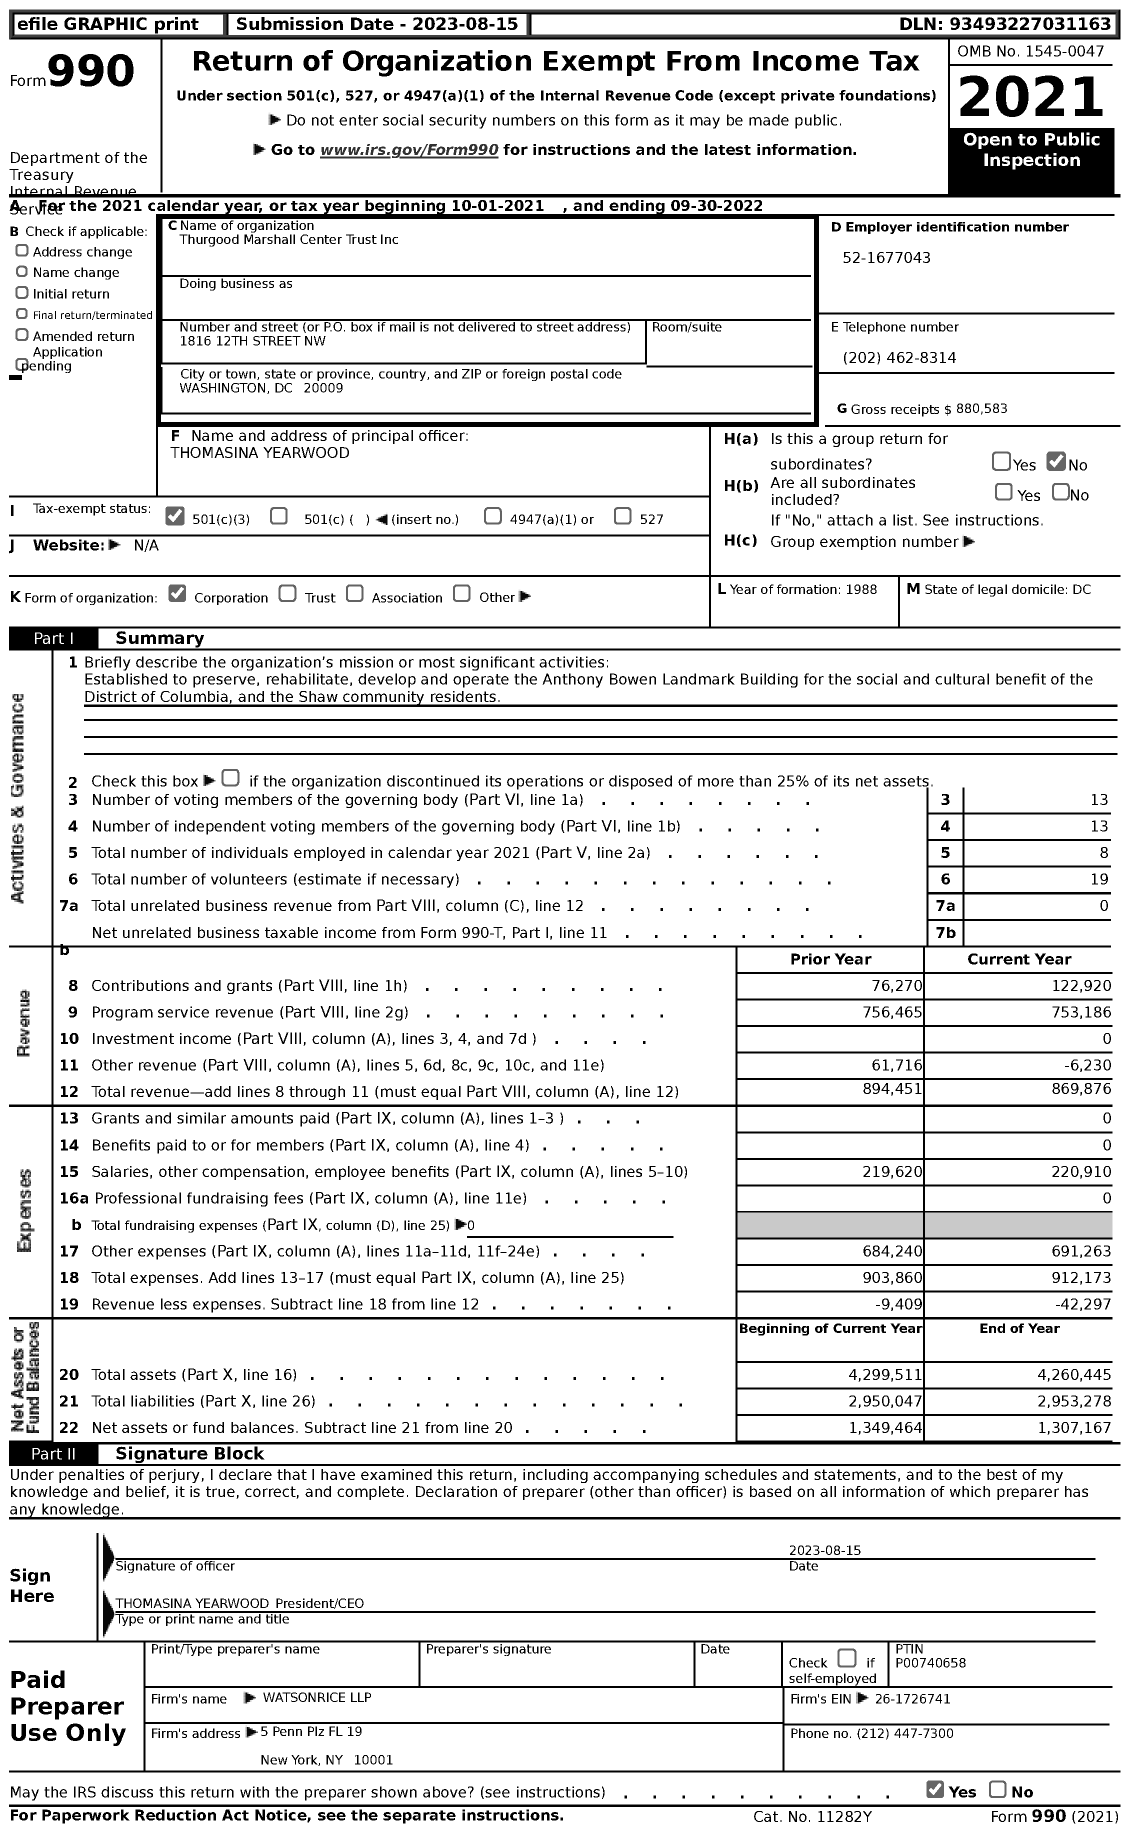 Image of first page of 2021 Form 990 for Thurgood Marshall Center Trust